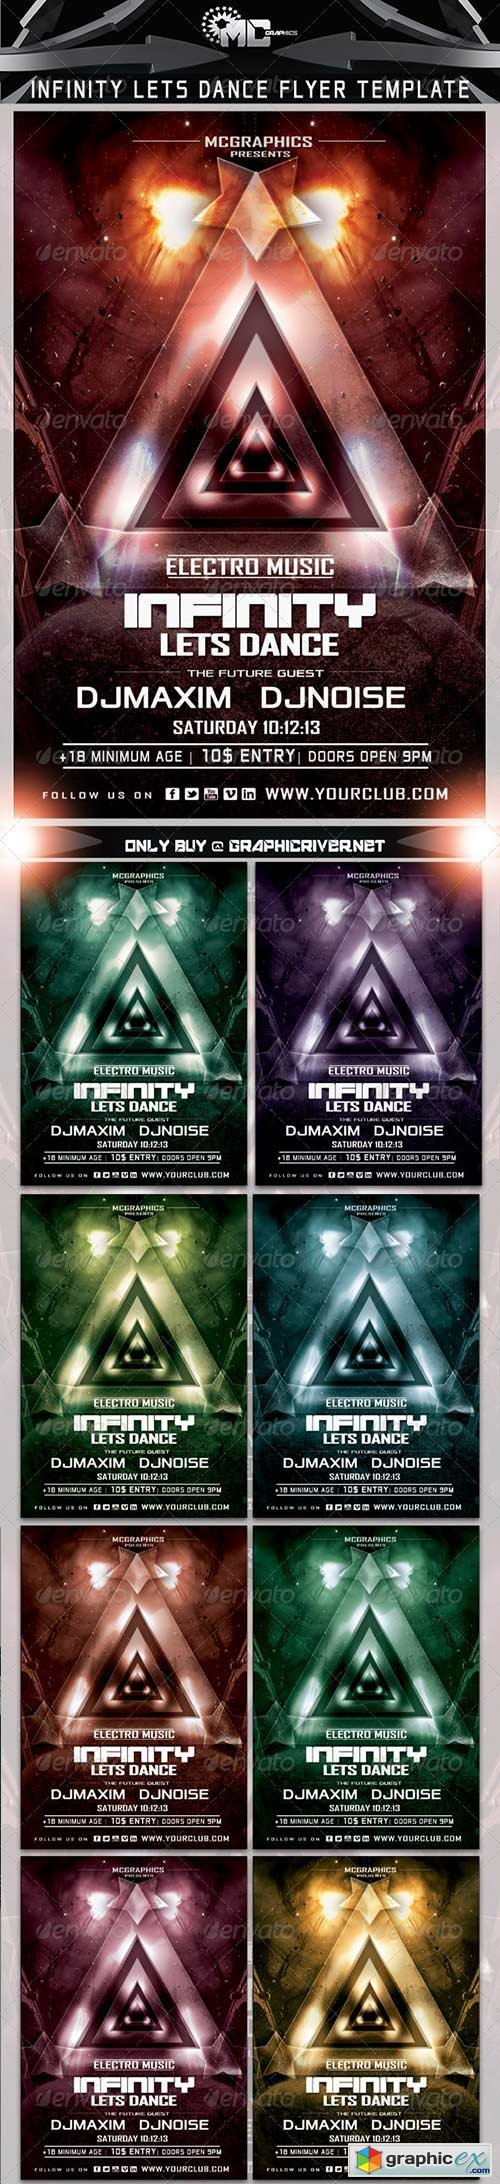 Infinity Lets Dance Flyer Template